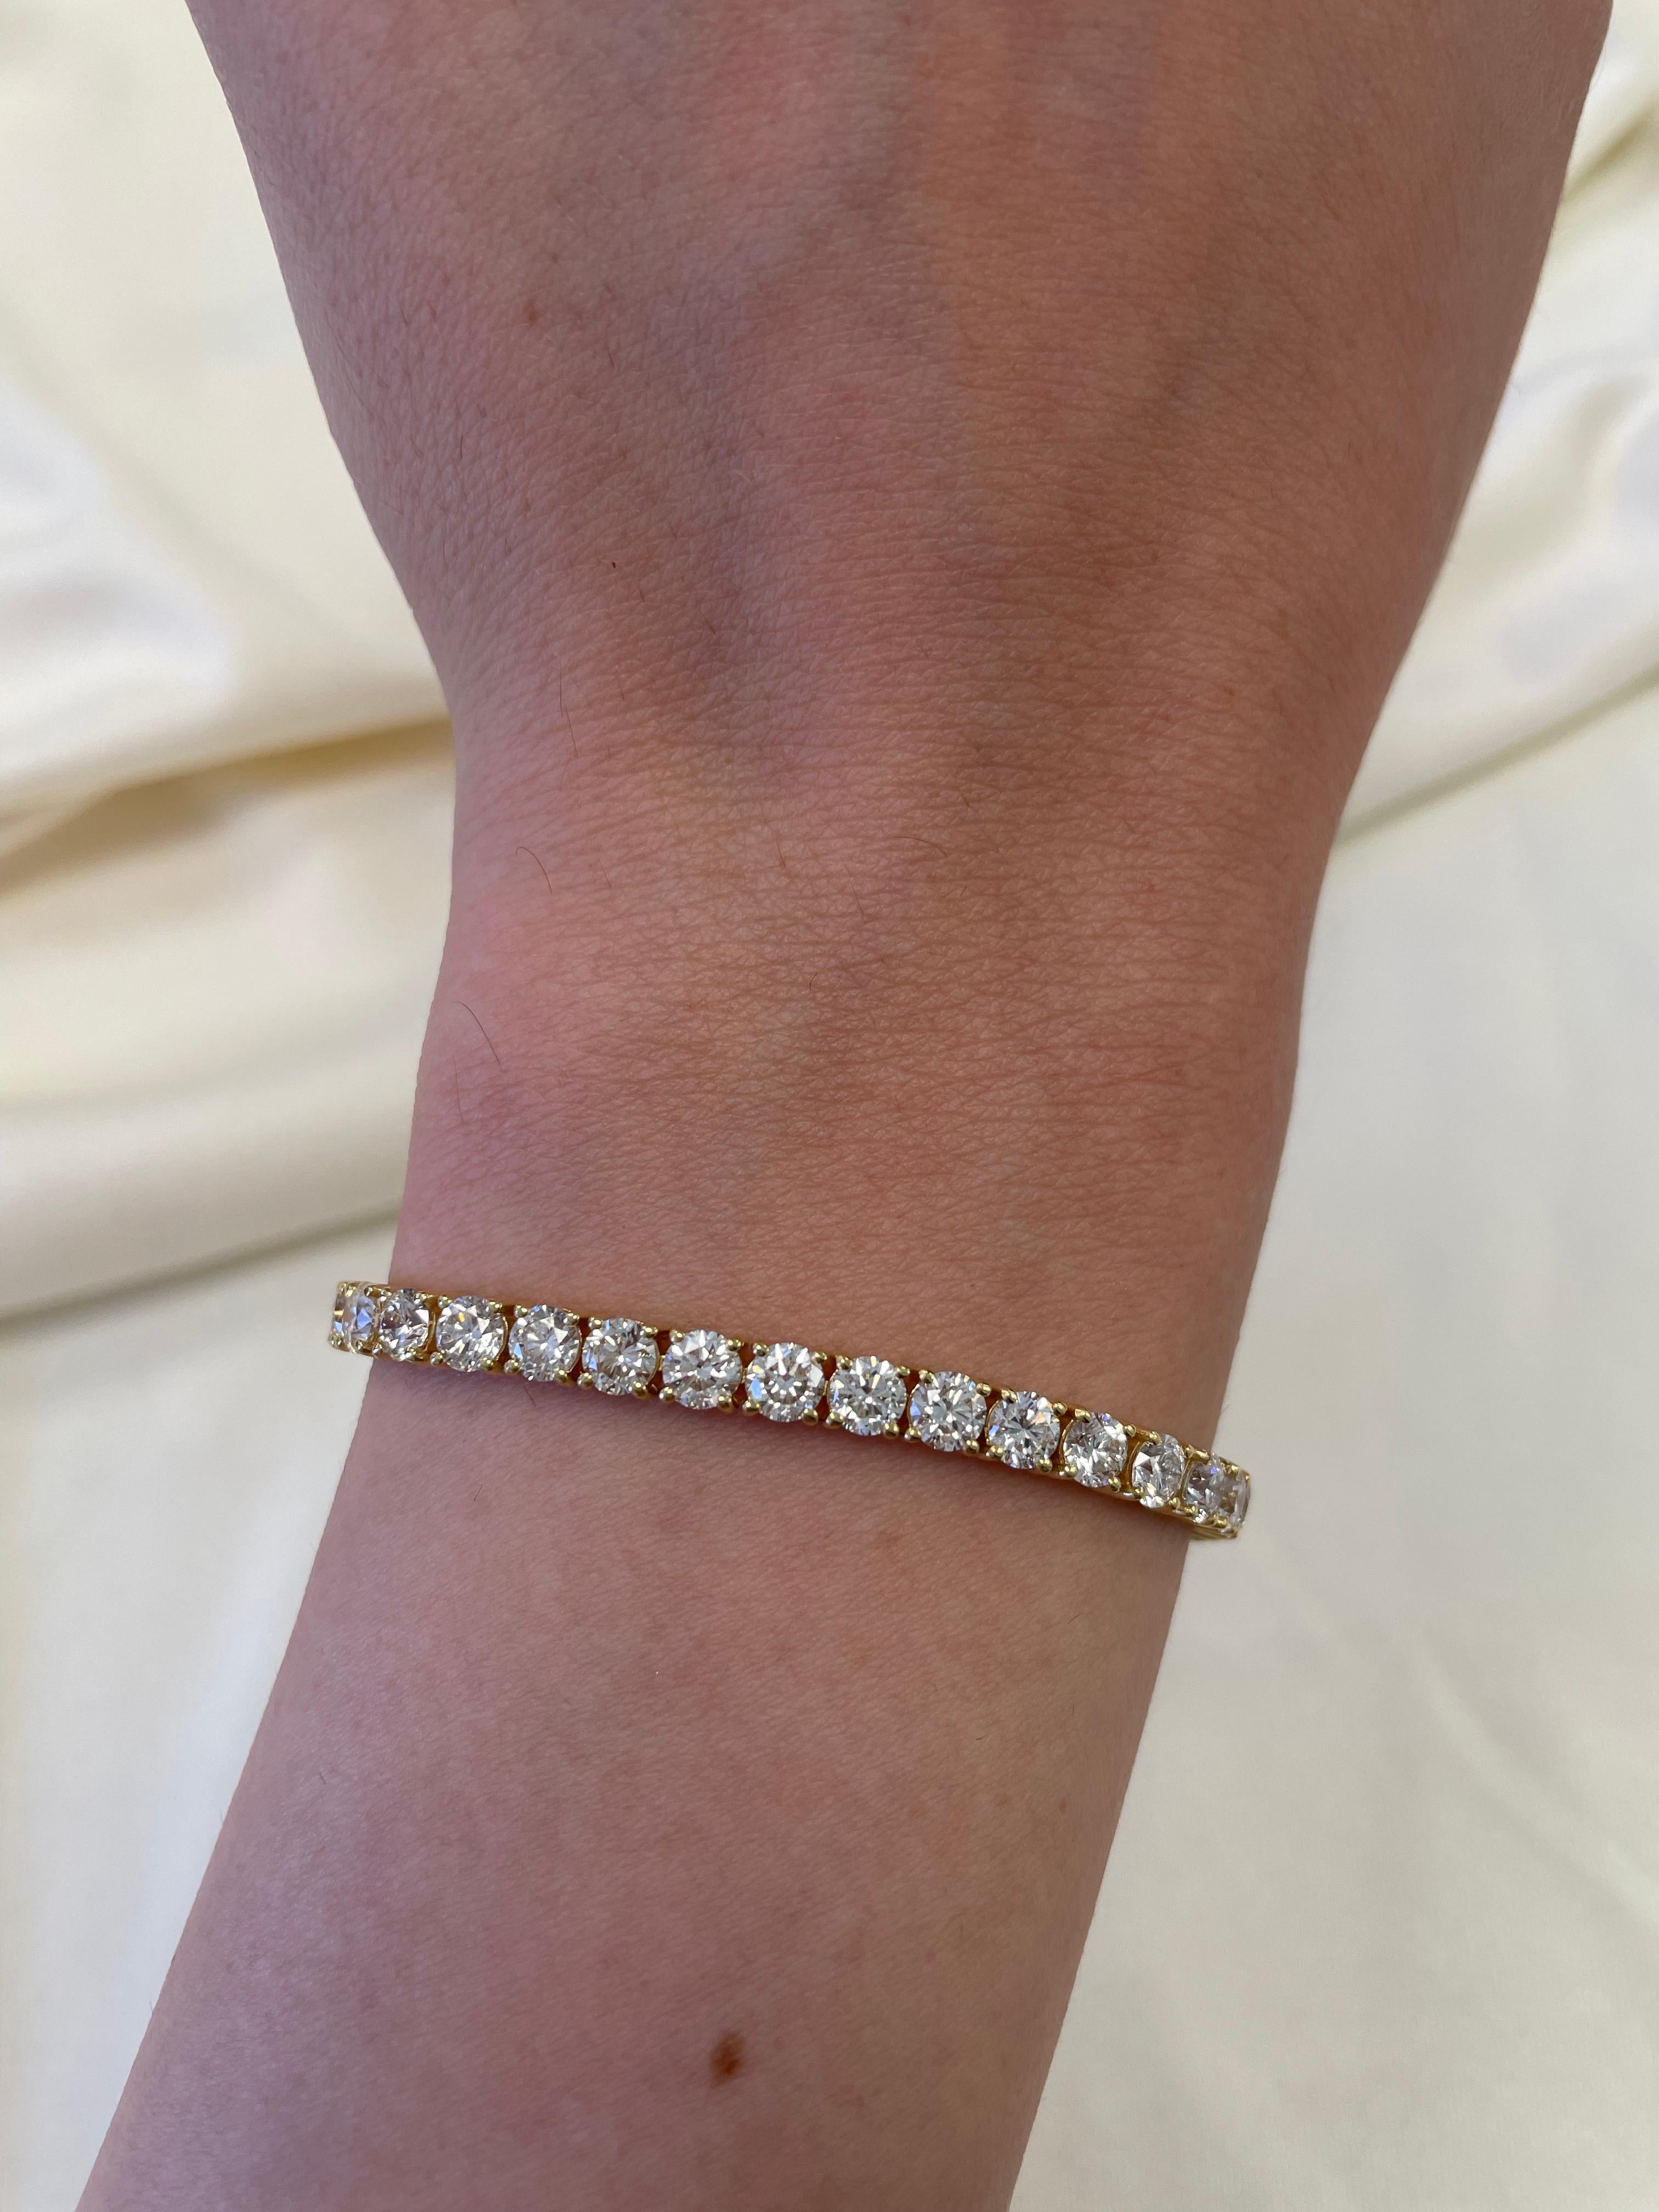 Exquisite and timeless diamonds tennis bracelet, by Alexander Beverly Hills.
45 round brilliant diamonds, 9.52 carats total. Approximately G/H color and VS clarity. Four prong set in 18k yellow gold, 11.30 grams, 7 inches. 
Accommodated with an